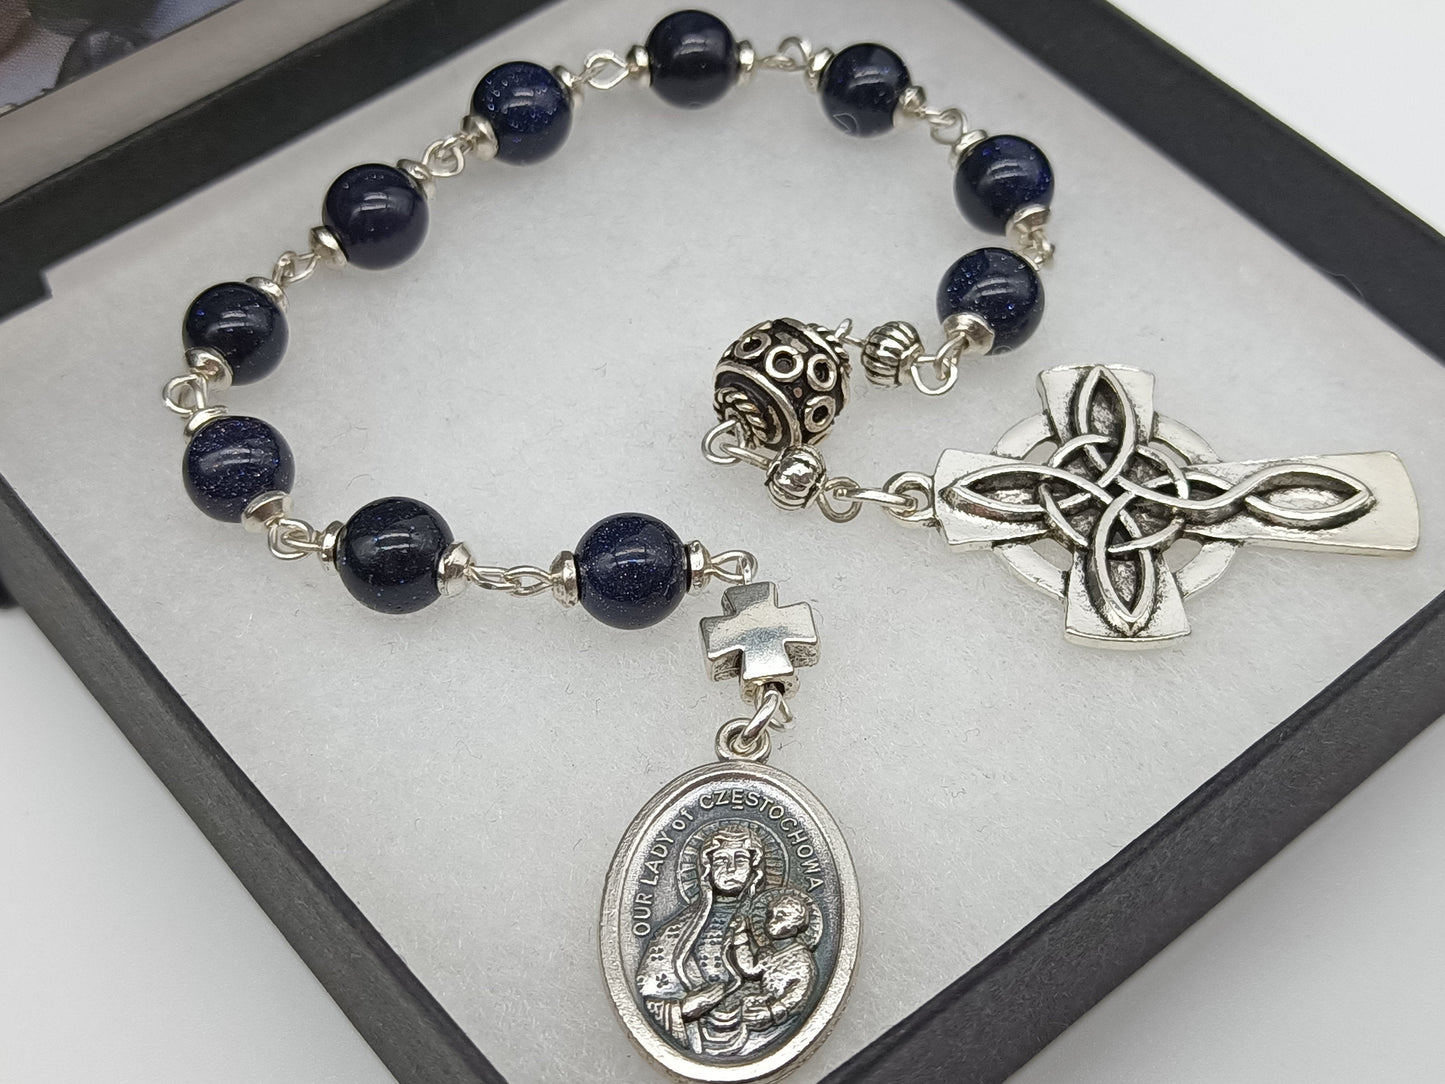 Our Lady of Czestochowa RELIC single decade Rosary beads, Tenner prayer bead rosaries, Spiritual rosary gift, Handcrafted wedding Rosaries.